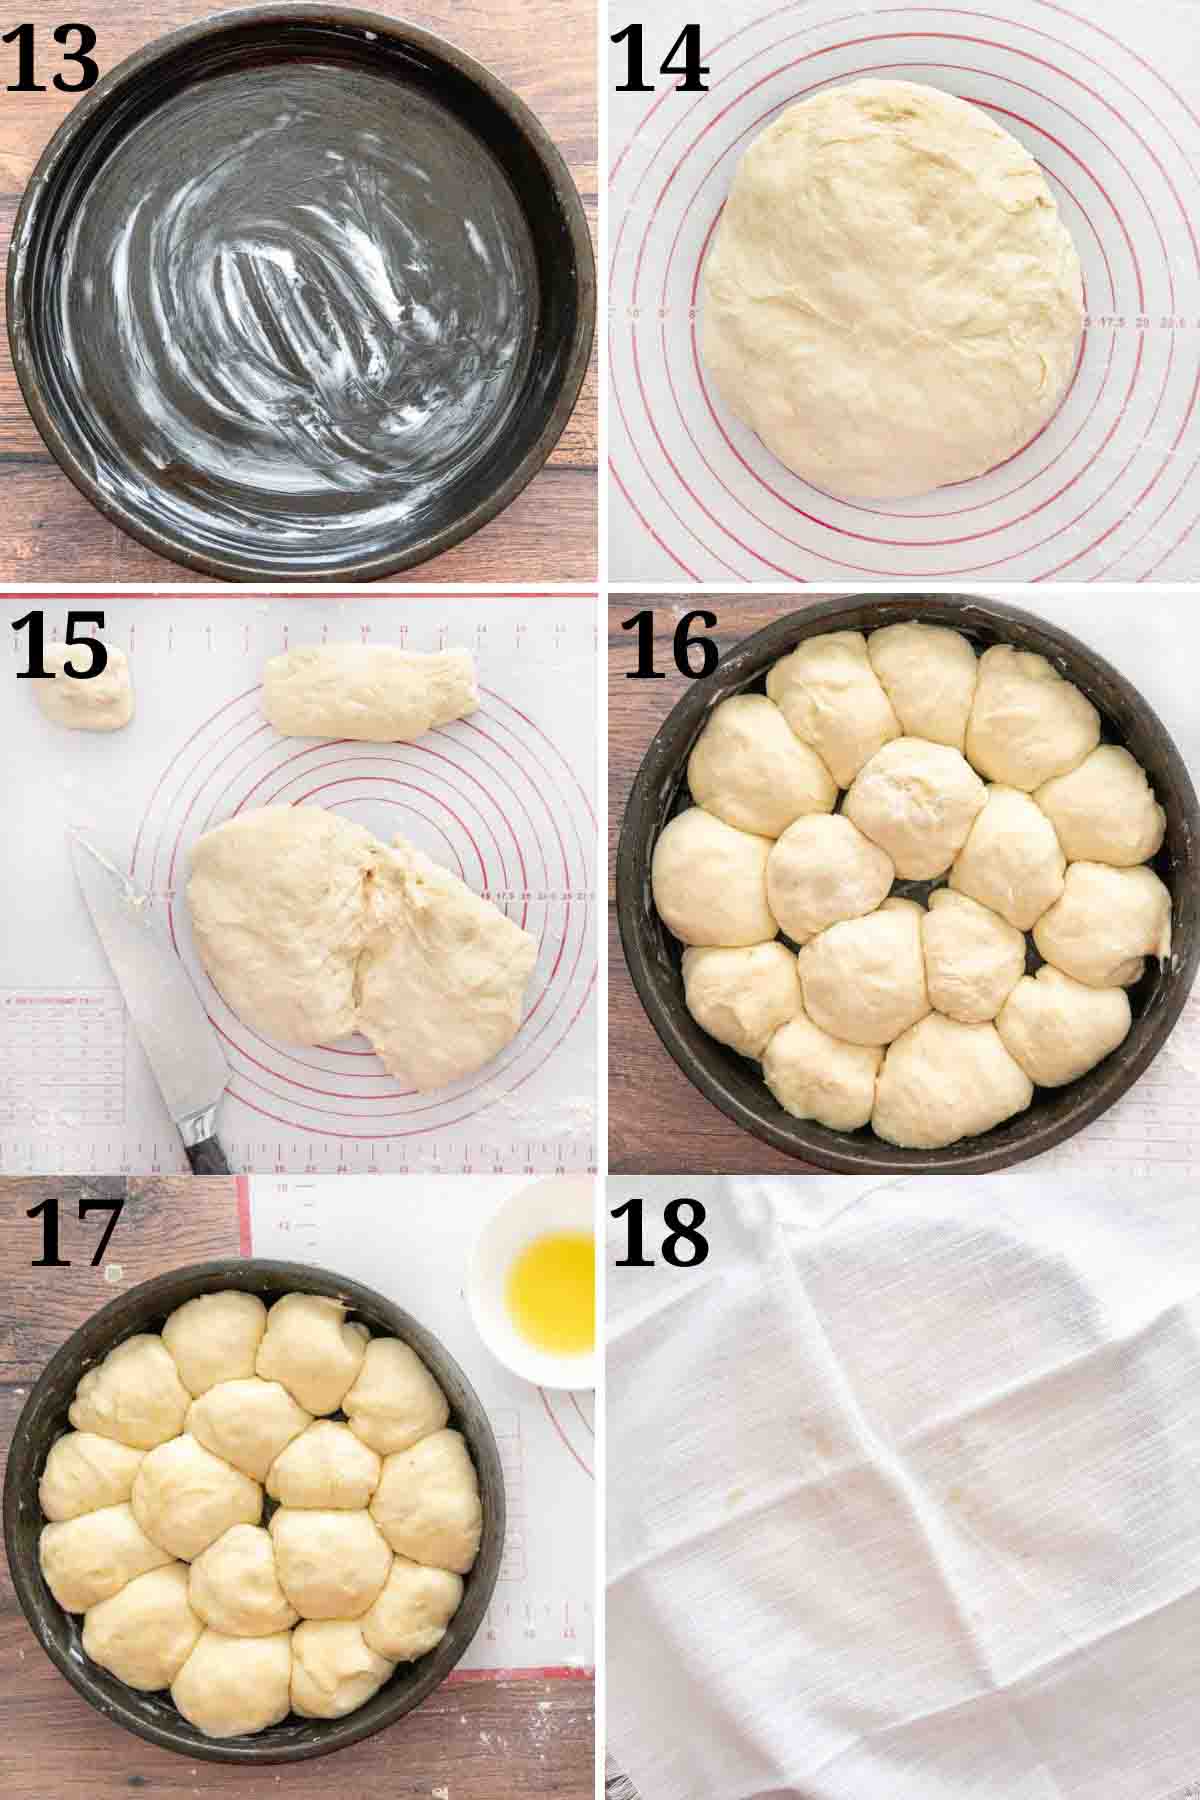 Collage showing final steps to make recipe.